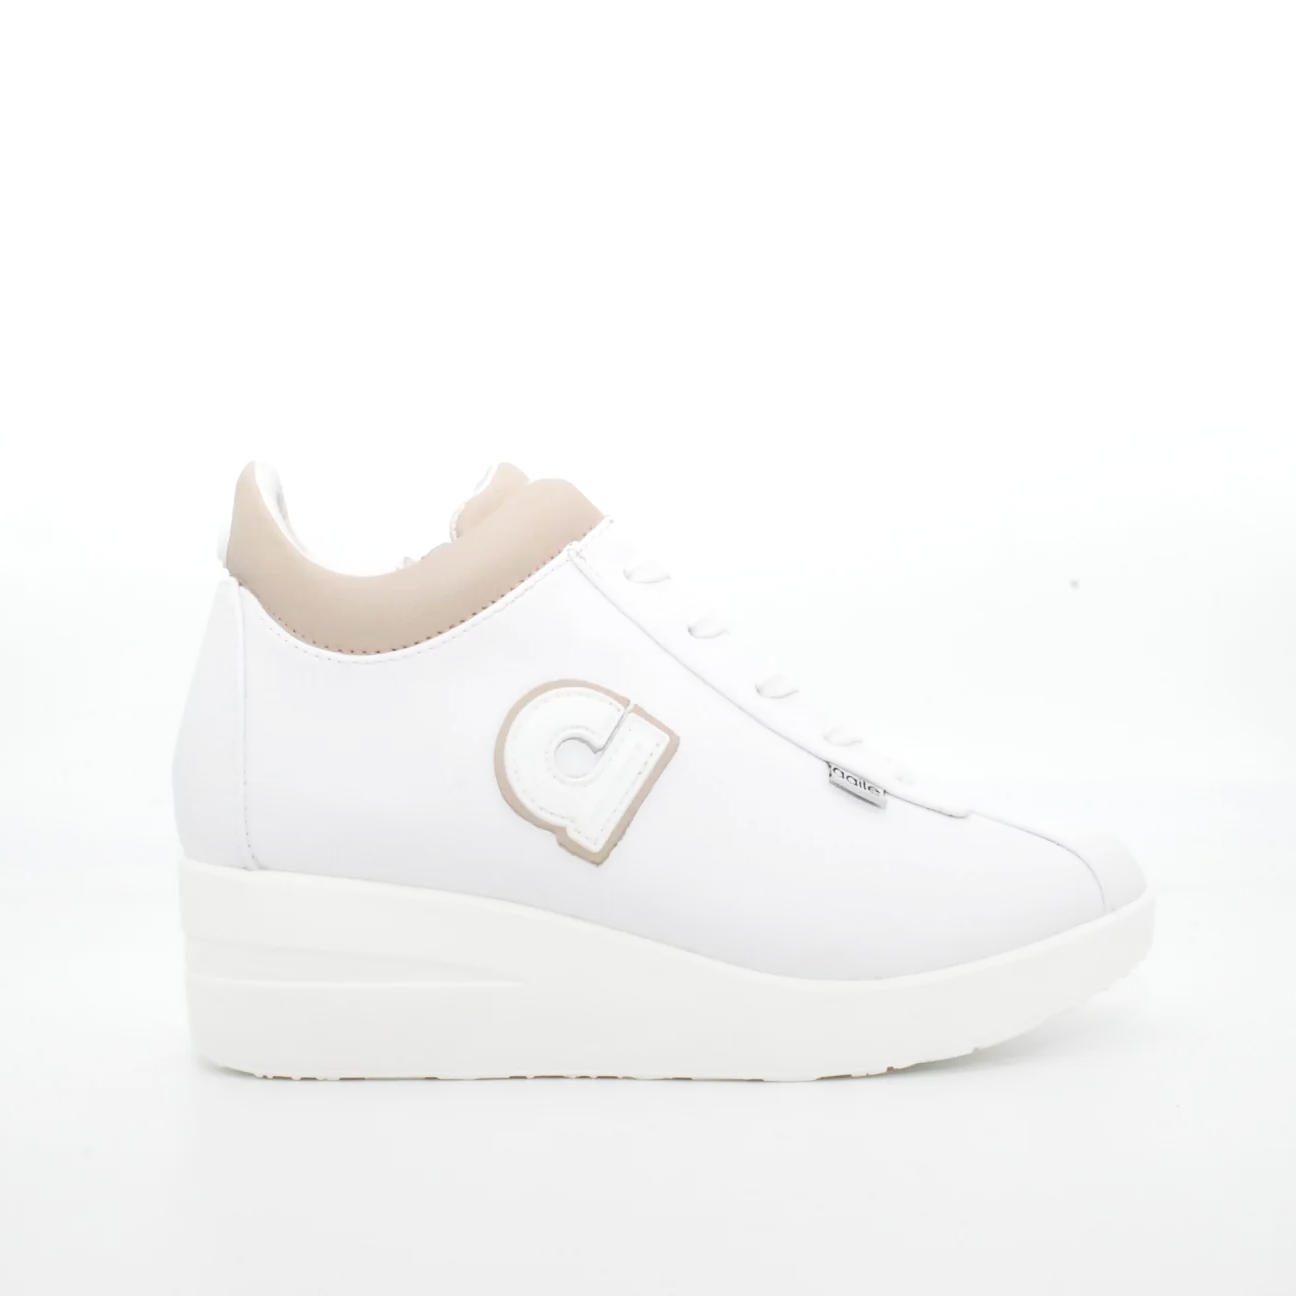 sneakers-agile-by-rucoline-35-tortora-ecopelle-sneakers.png